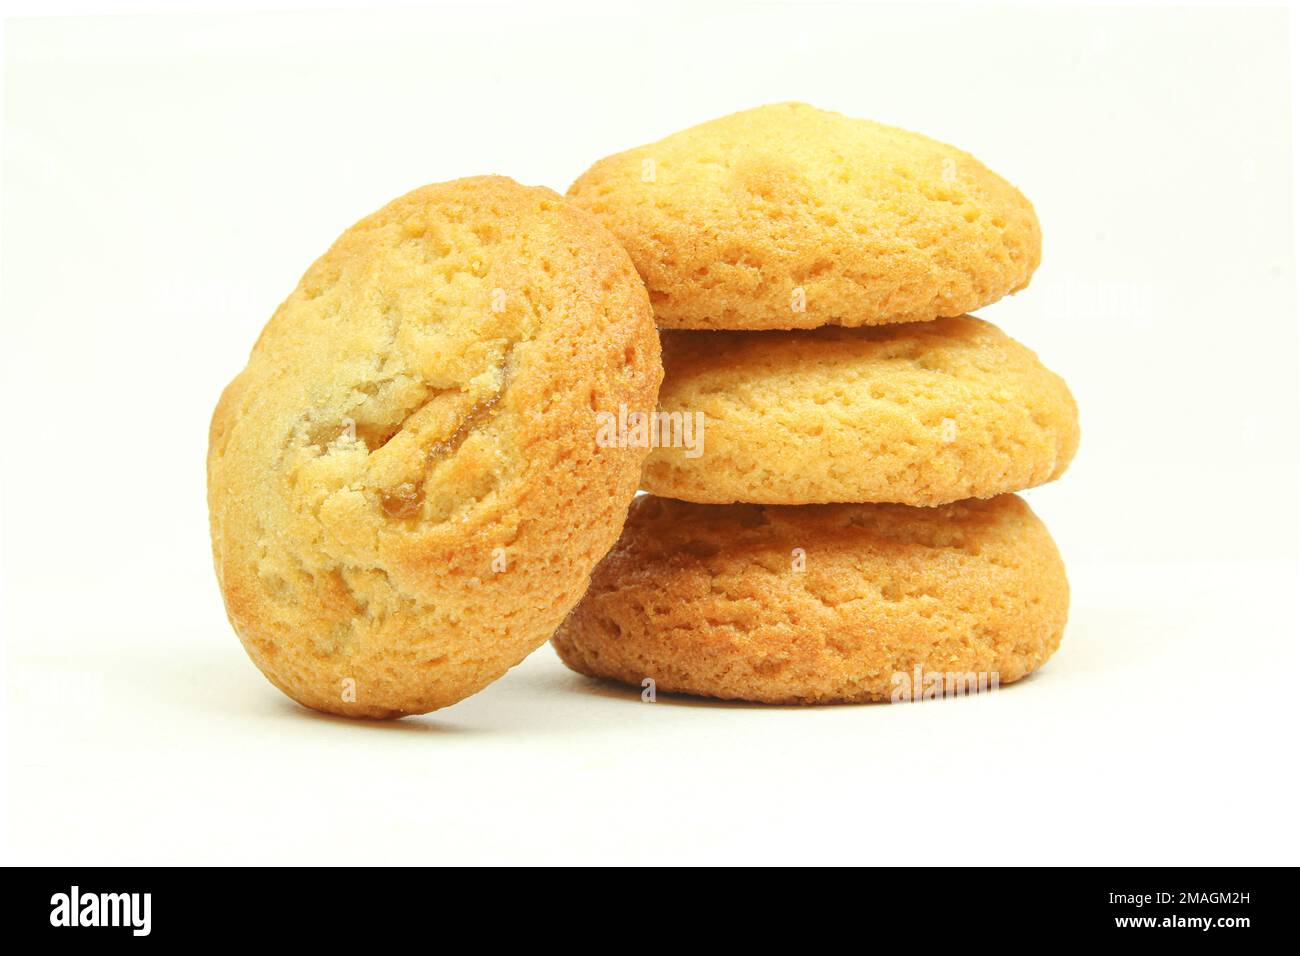 Stack of golden colour biscuits isolated on white background Stock Photo